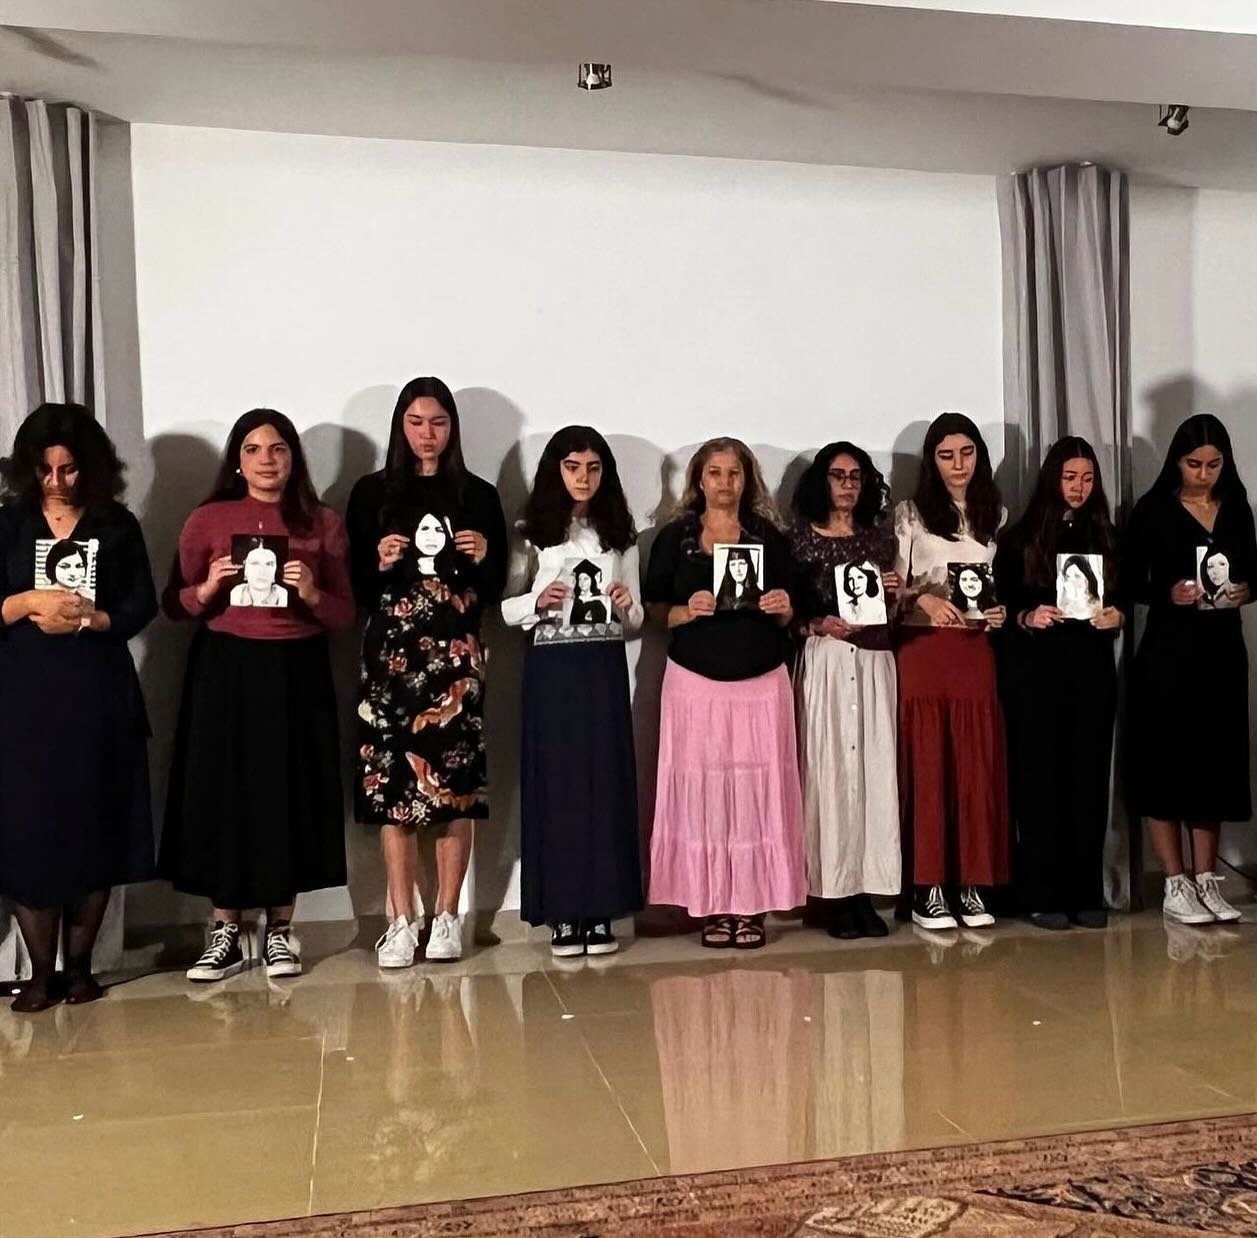 Sharing a powerful tribute from Portugal to the 10 Bah&aacute;&rsquo;&iacute; women of Shiraz. This moving play, performed by youth from across the country, delved into the life of the youngest among them, Mona Mahmoudnejad, who at 17, showed remarka